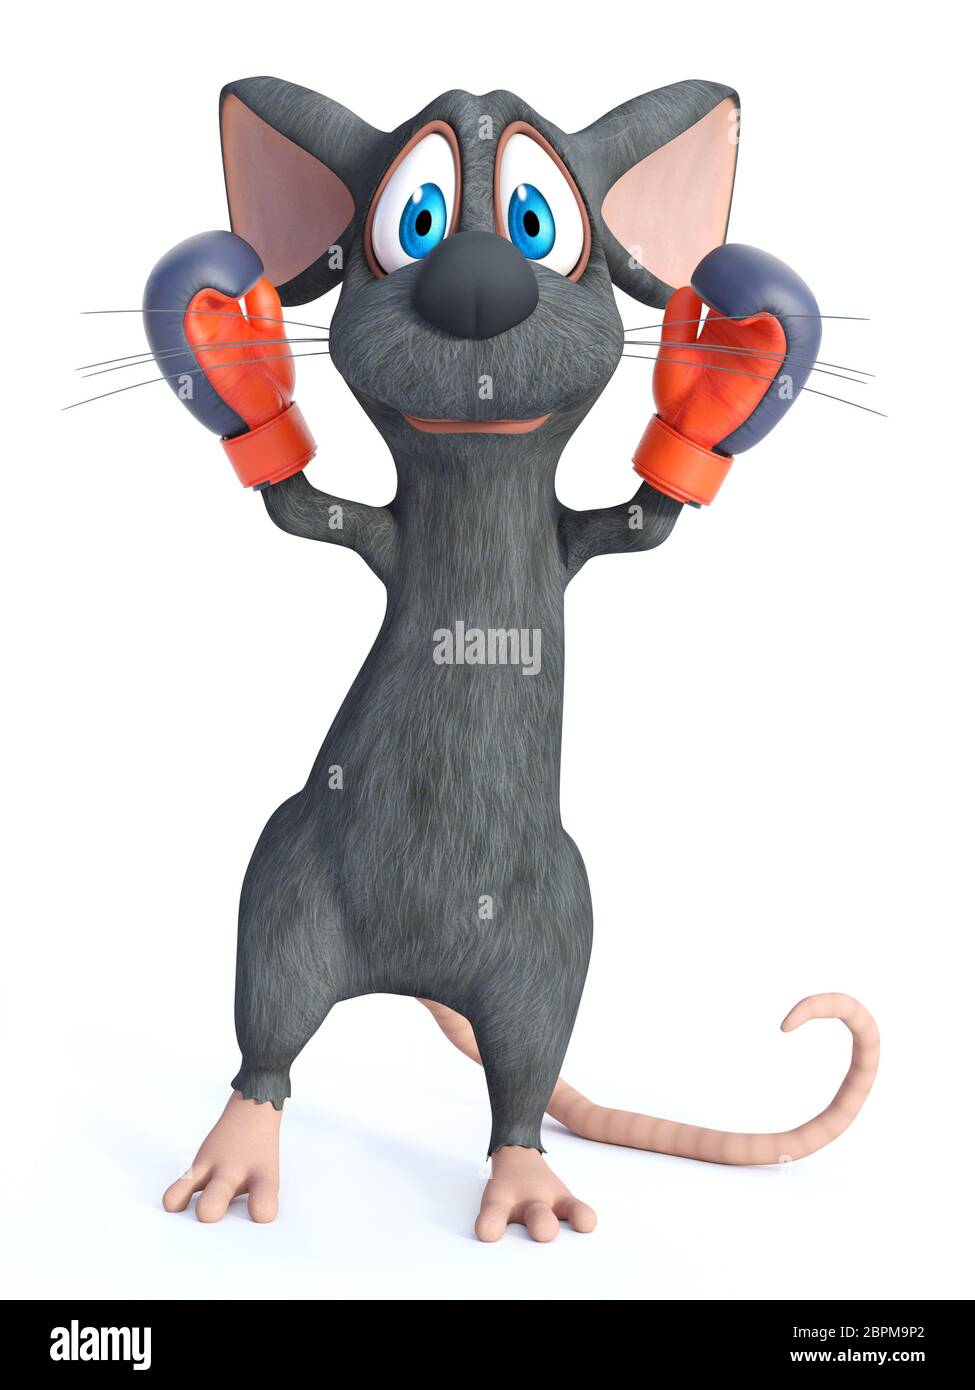 3D rendering of a cute cartoon mouse wearing boxing gloves. He looks like a winning champion. White background. Stock Photo